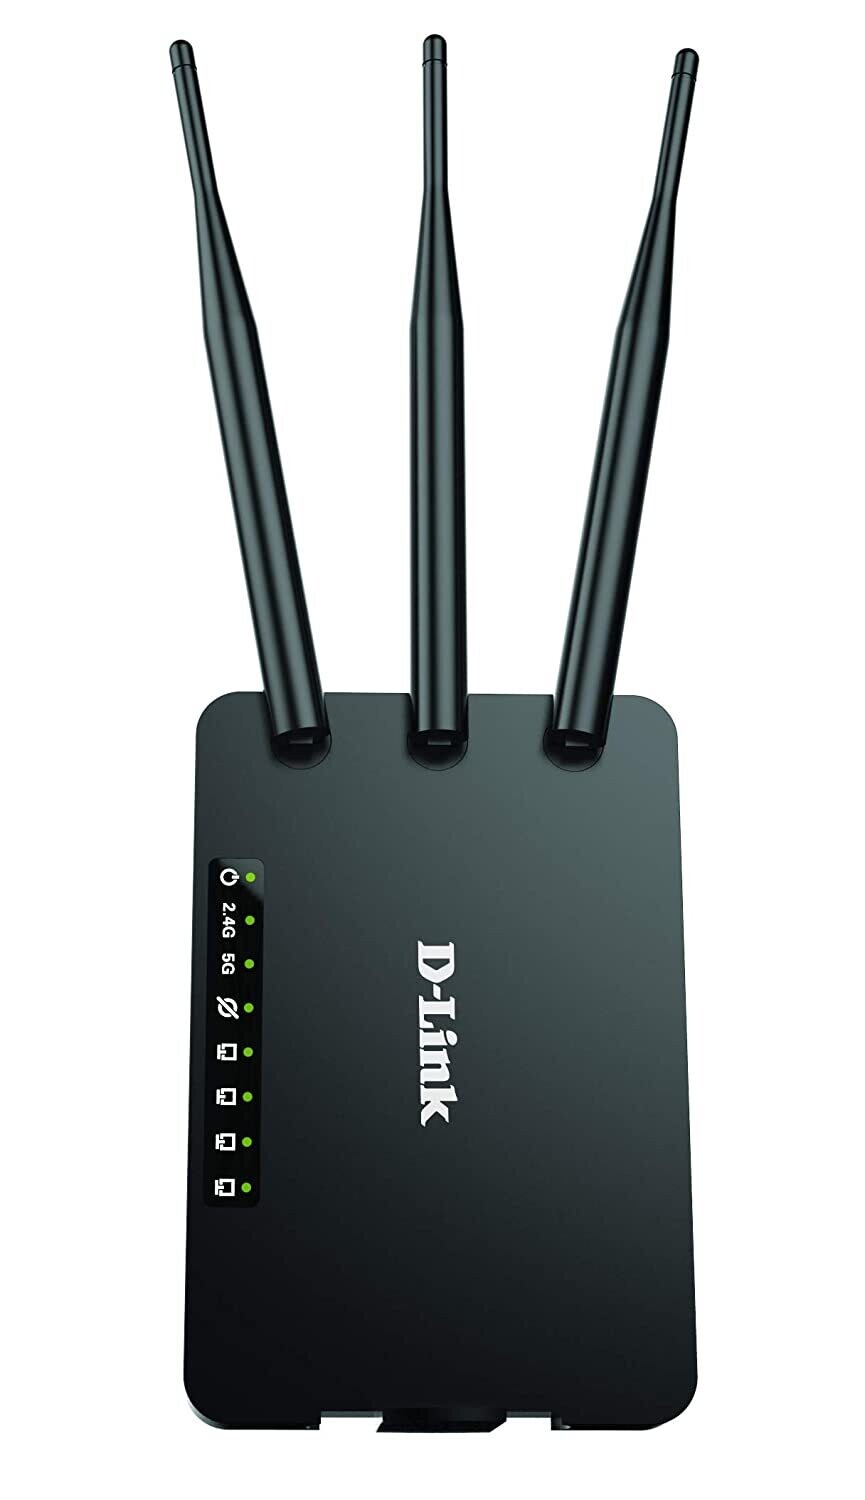 D-Link DIR-806IN Wireless AC750 Dual Band Router - Rs.1600